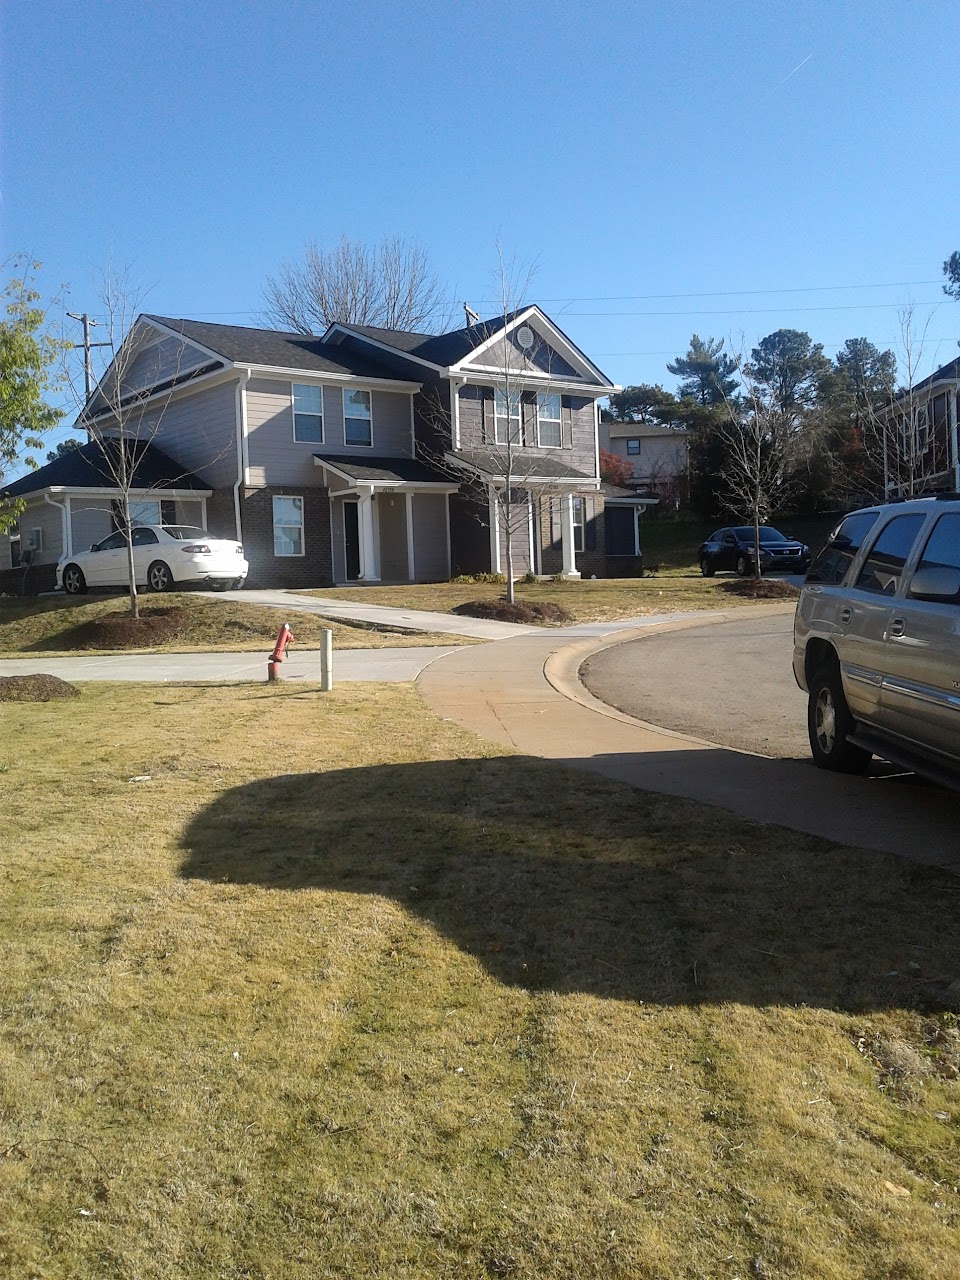 Photo of VILLAGE AT RIVER'S EDGE. Affordable housing located at 4031 PEARL STREET COLUMBIA, SC 29203